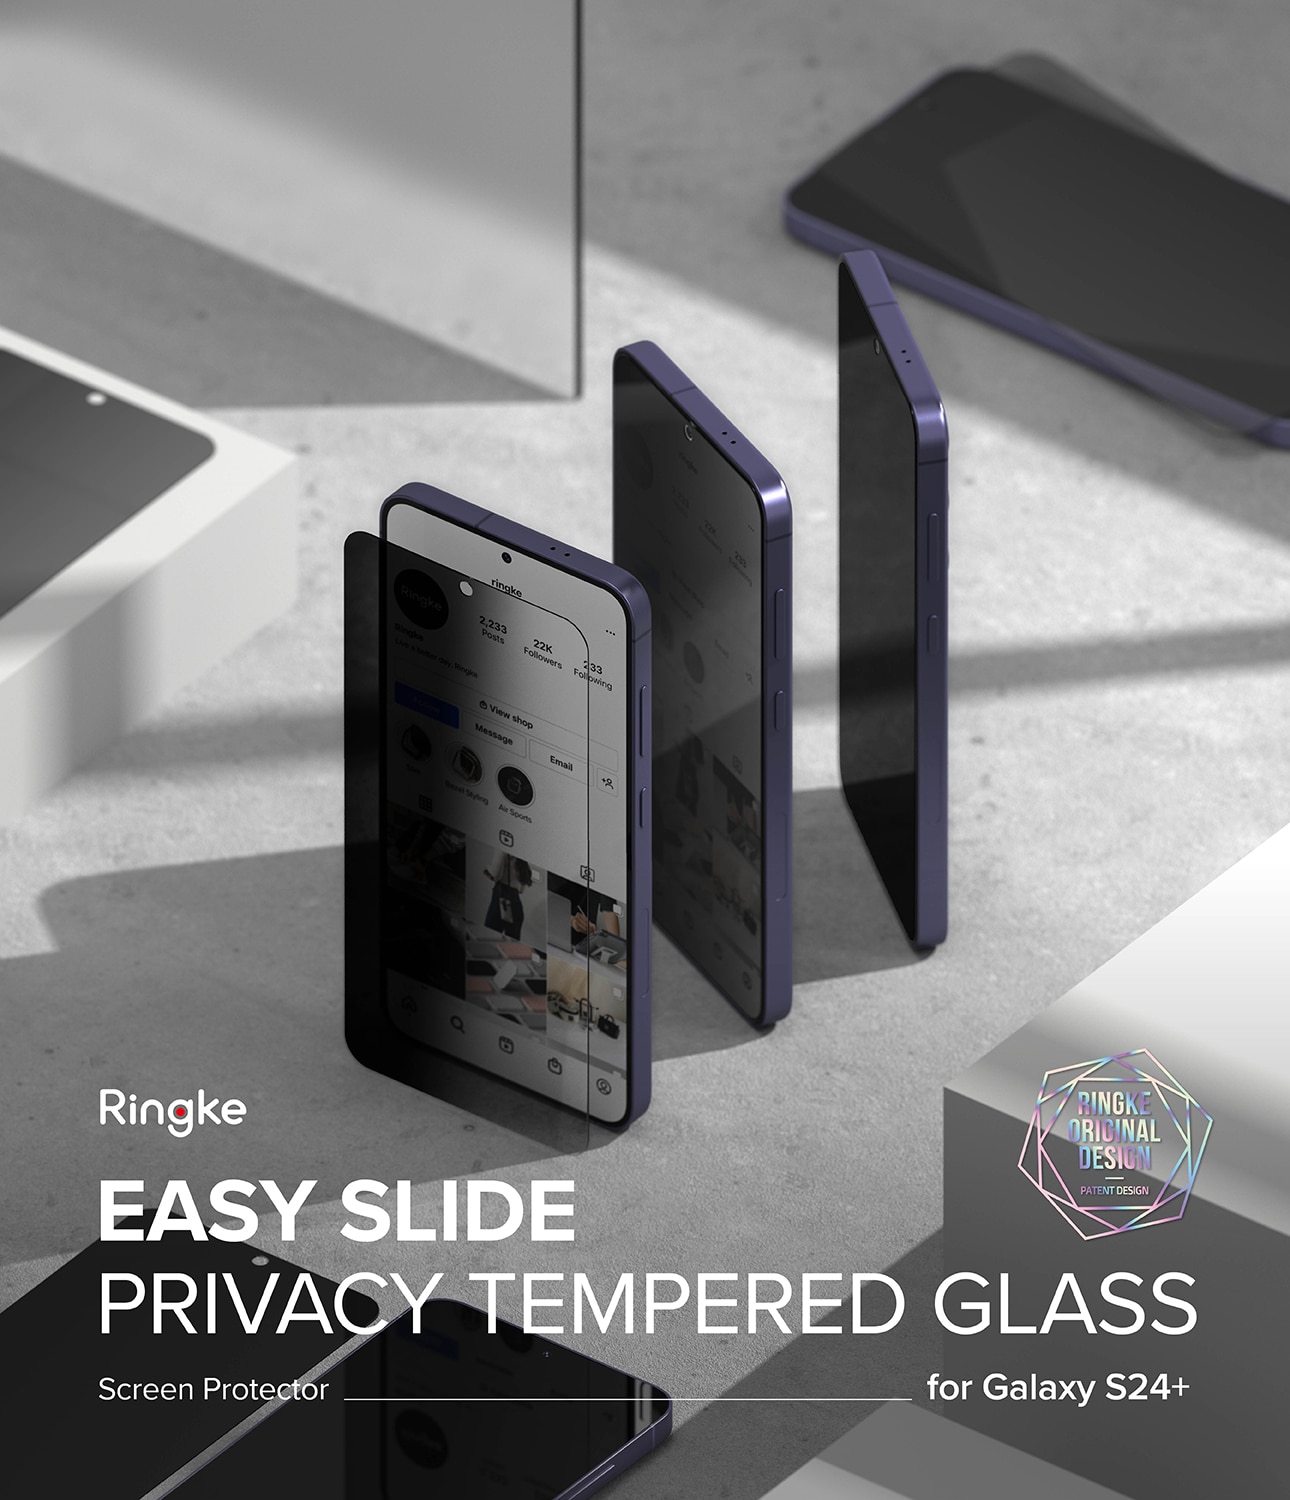 Samsung Galaxy S24 Plus Easy Slide Privacy Glass (2-pack)